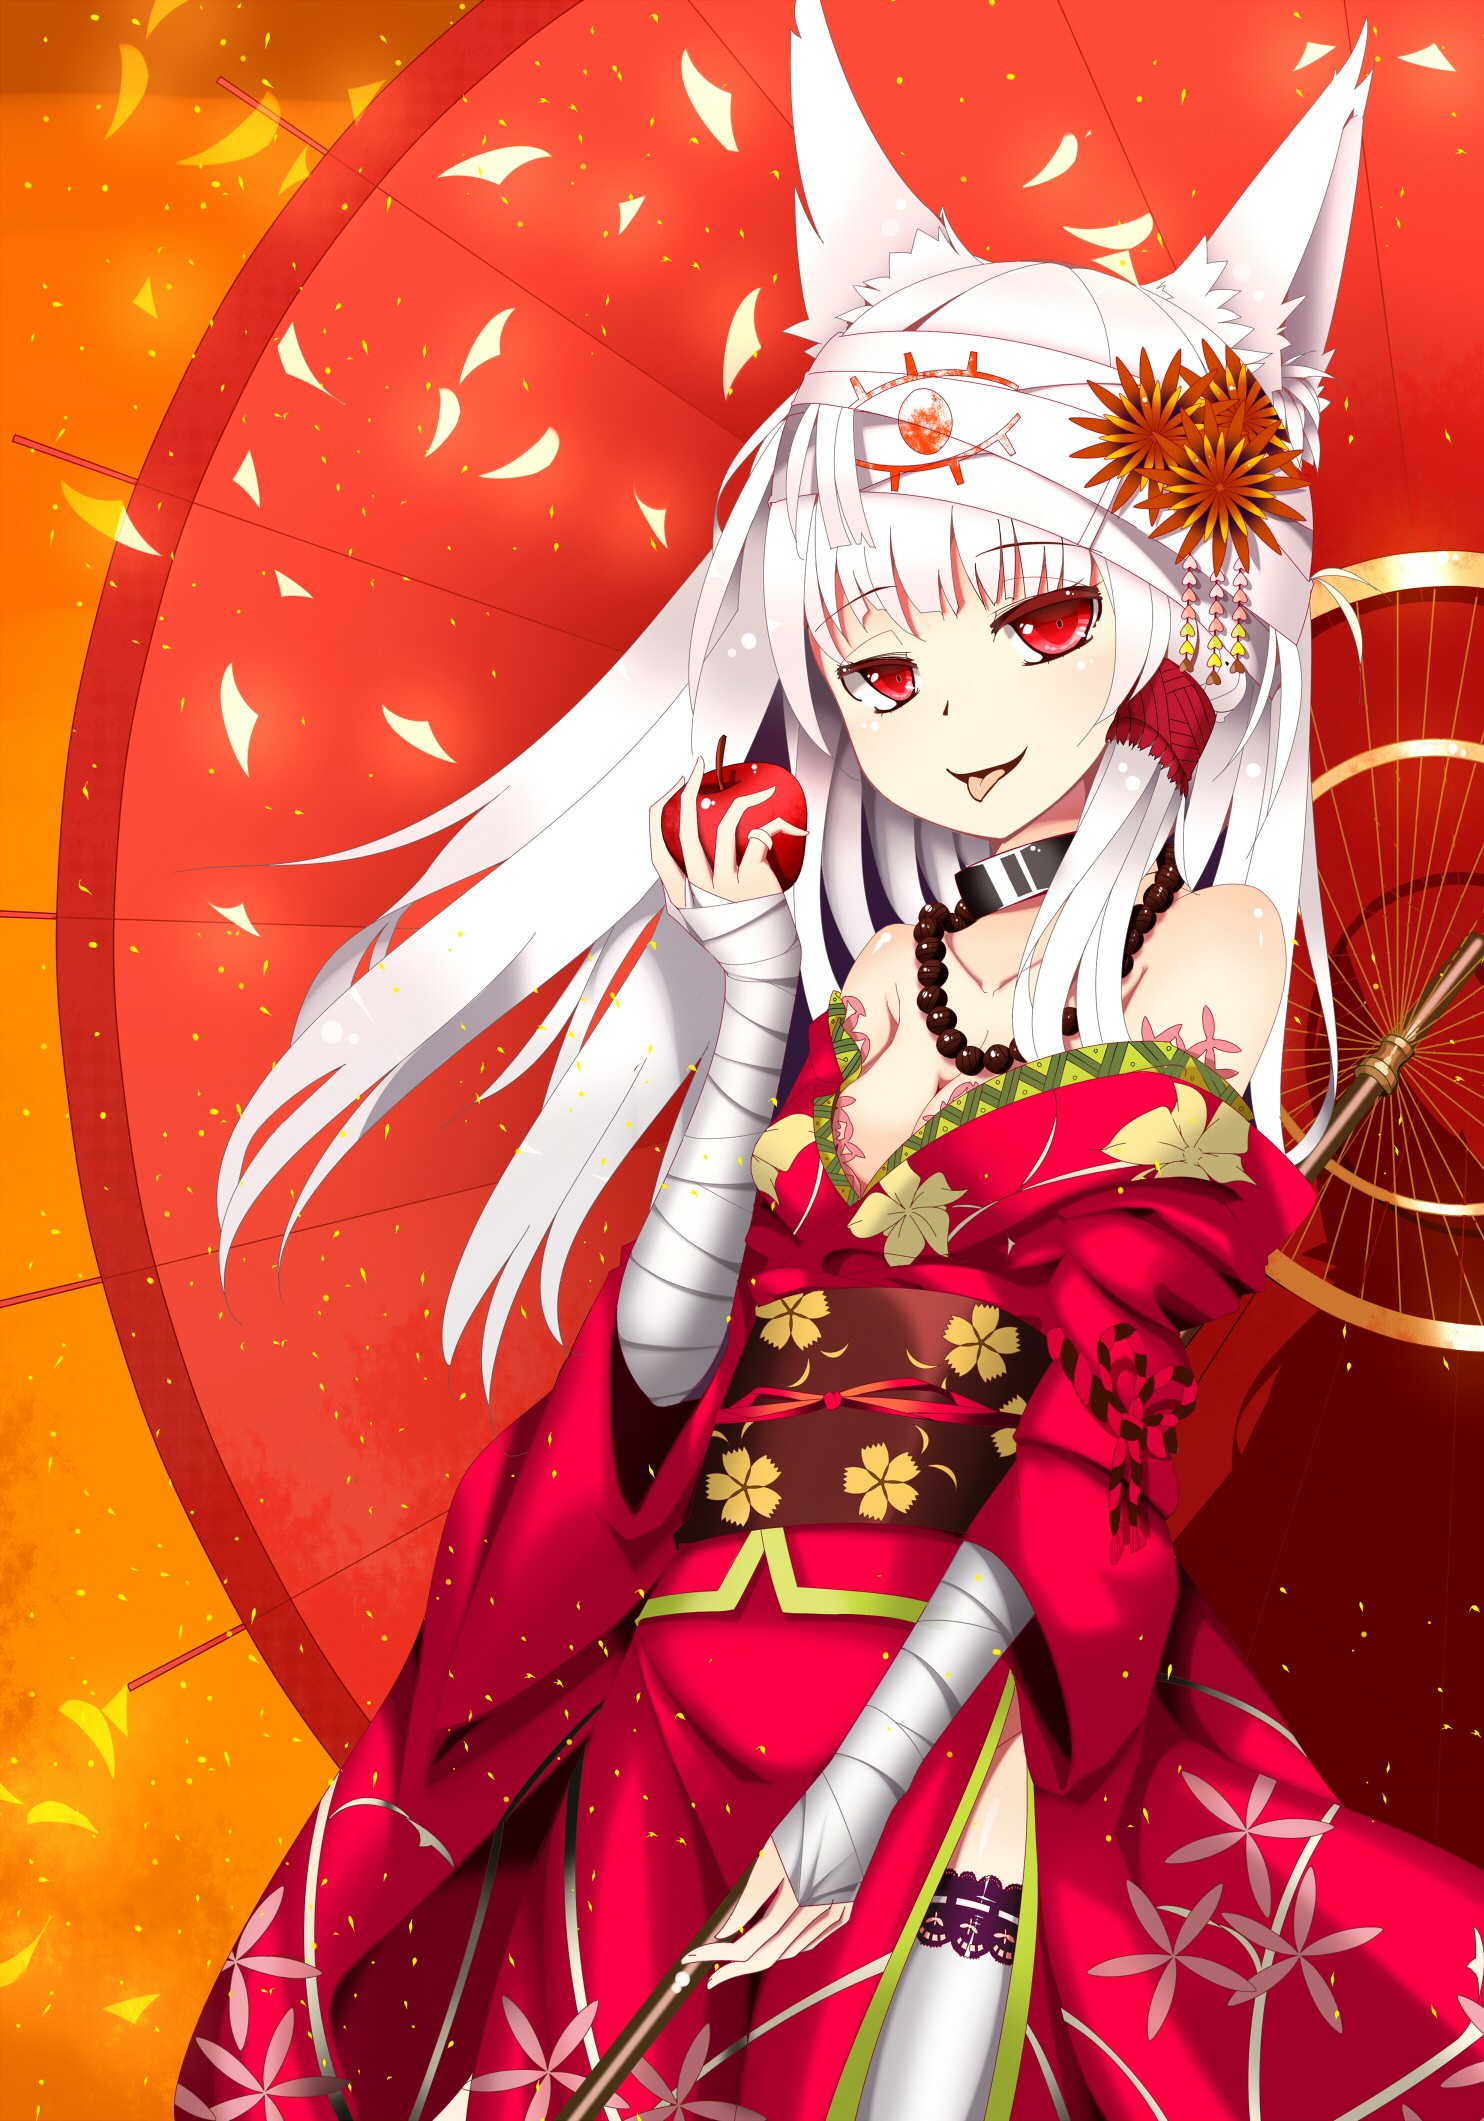 Anime 1484x2121 anime anime girls animal ears white hair red eyes apples Japanese clothes bandages long hair standing umbrella fantasy art fantasy girl food fruit Pixiv tongues tongue out traditional clothing dress